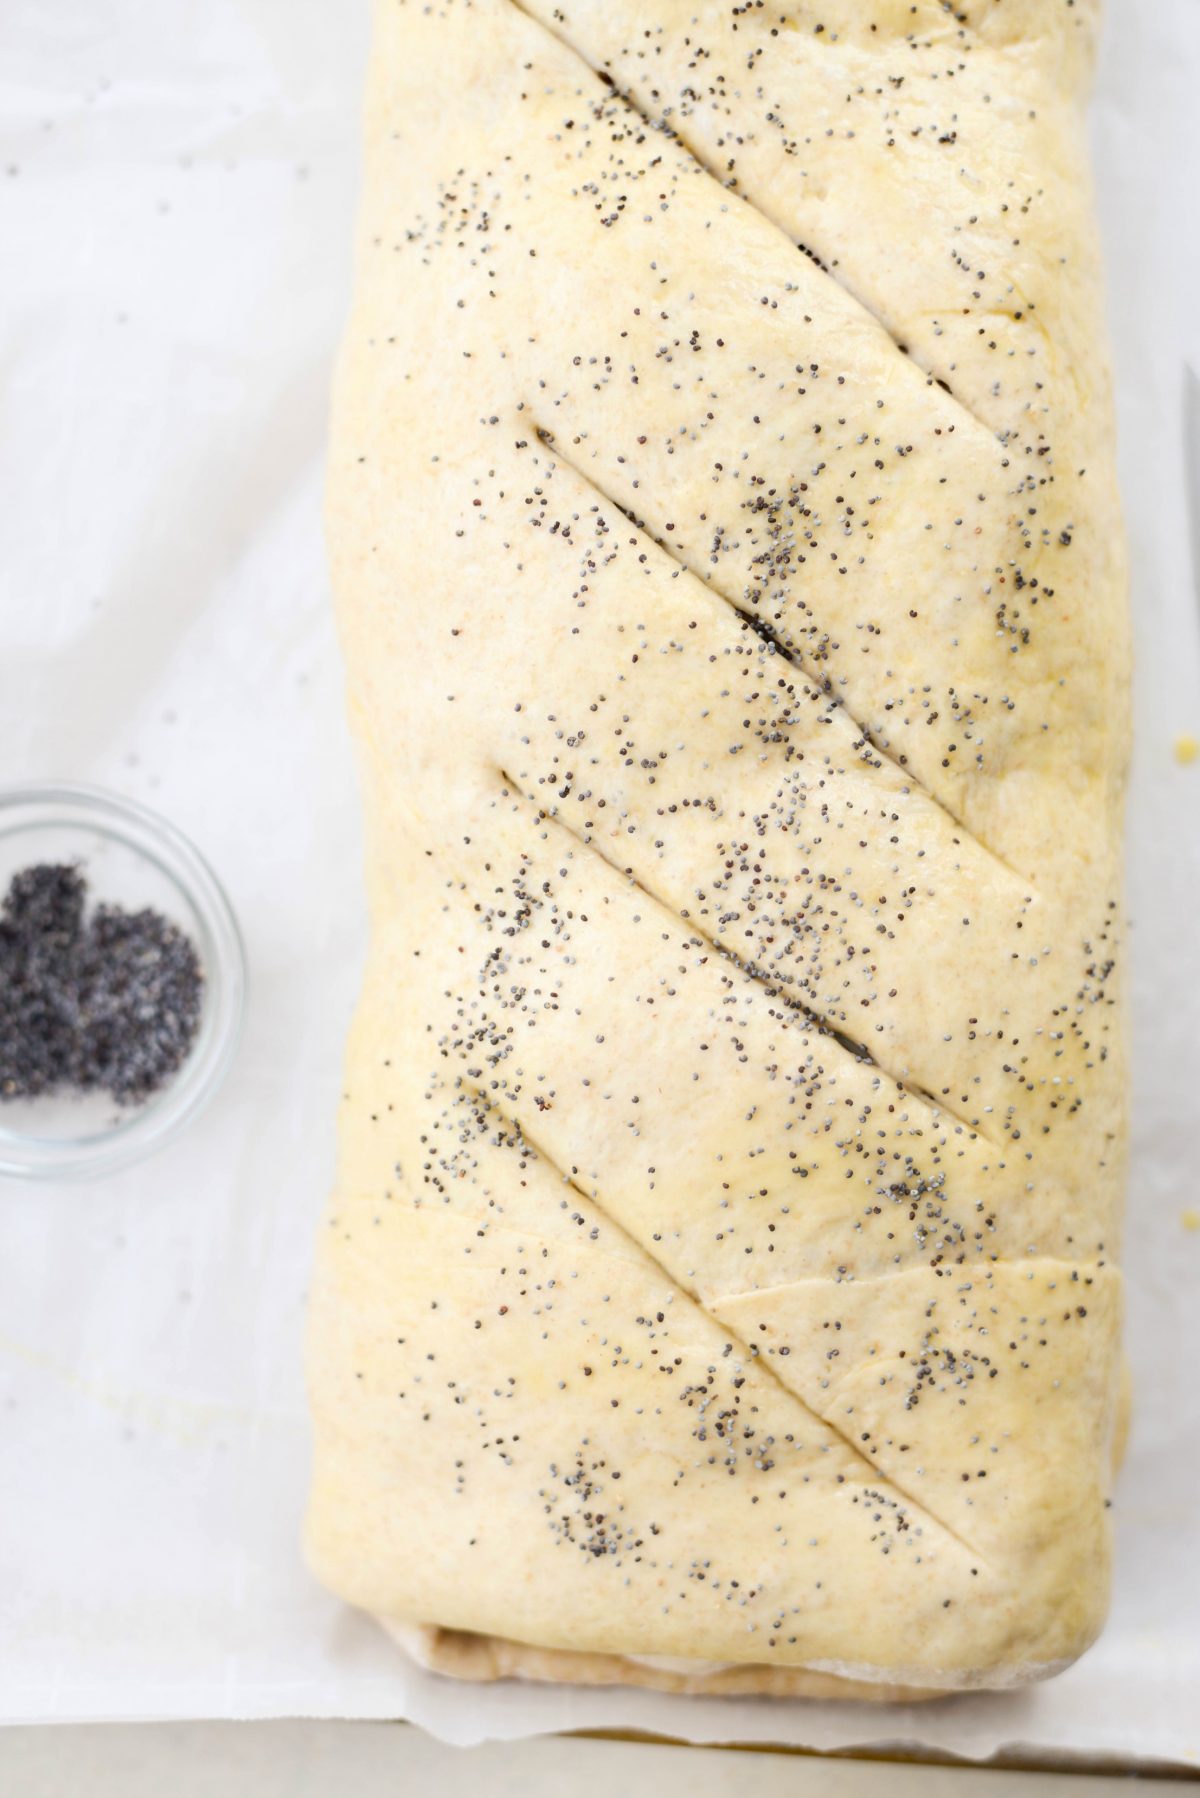 cut vents and sprinkle with poppy seeds